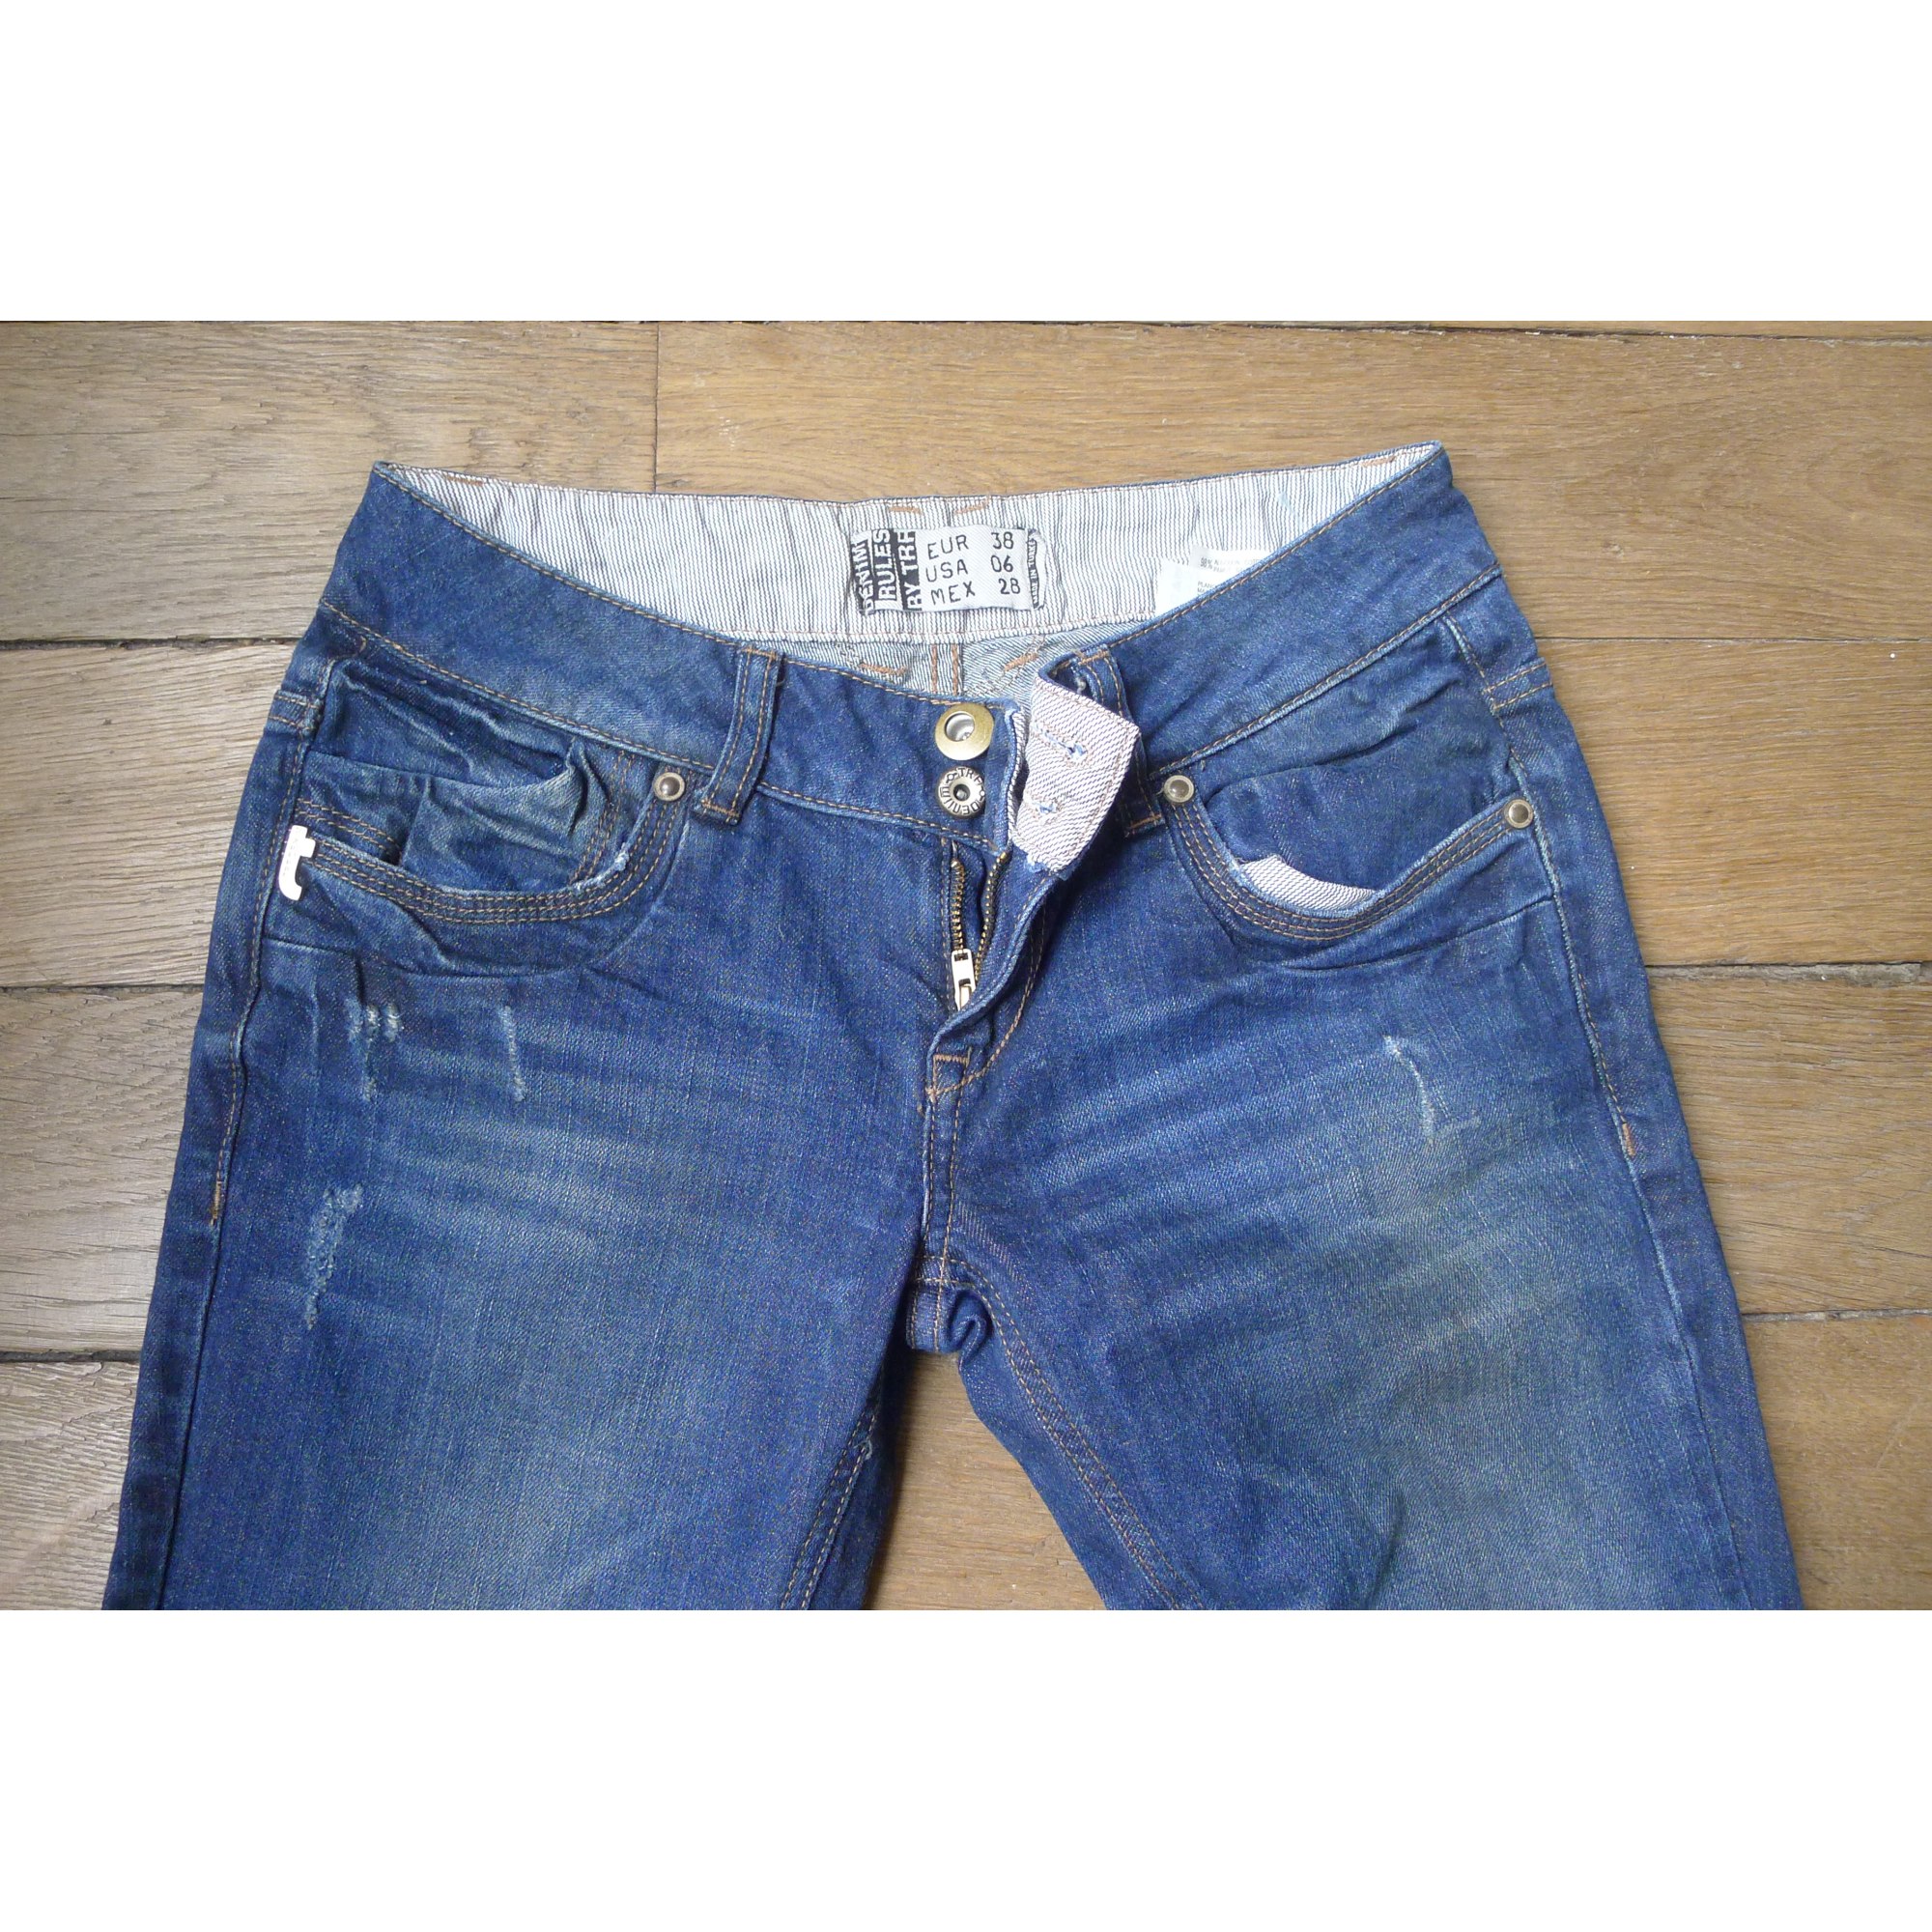 trf jeans